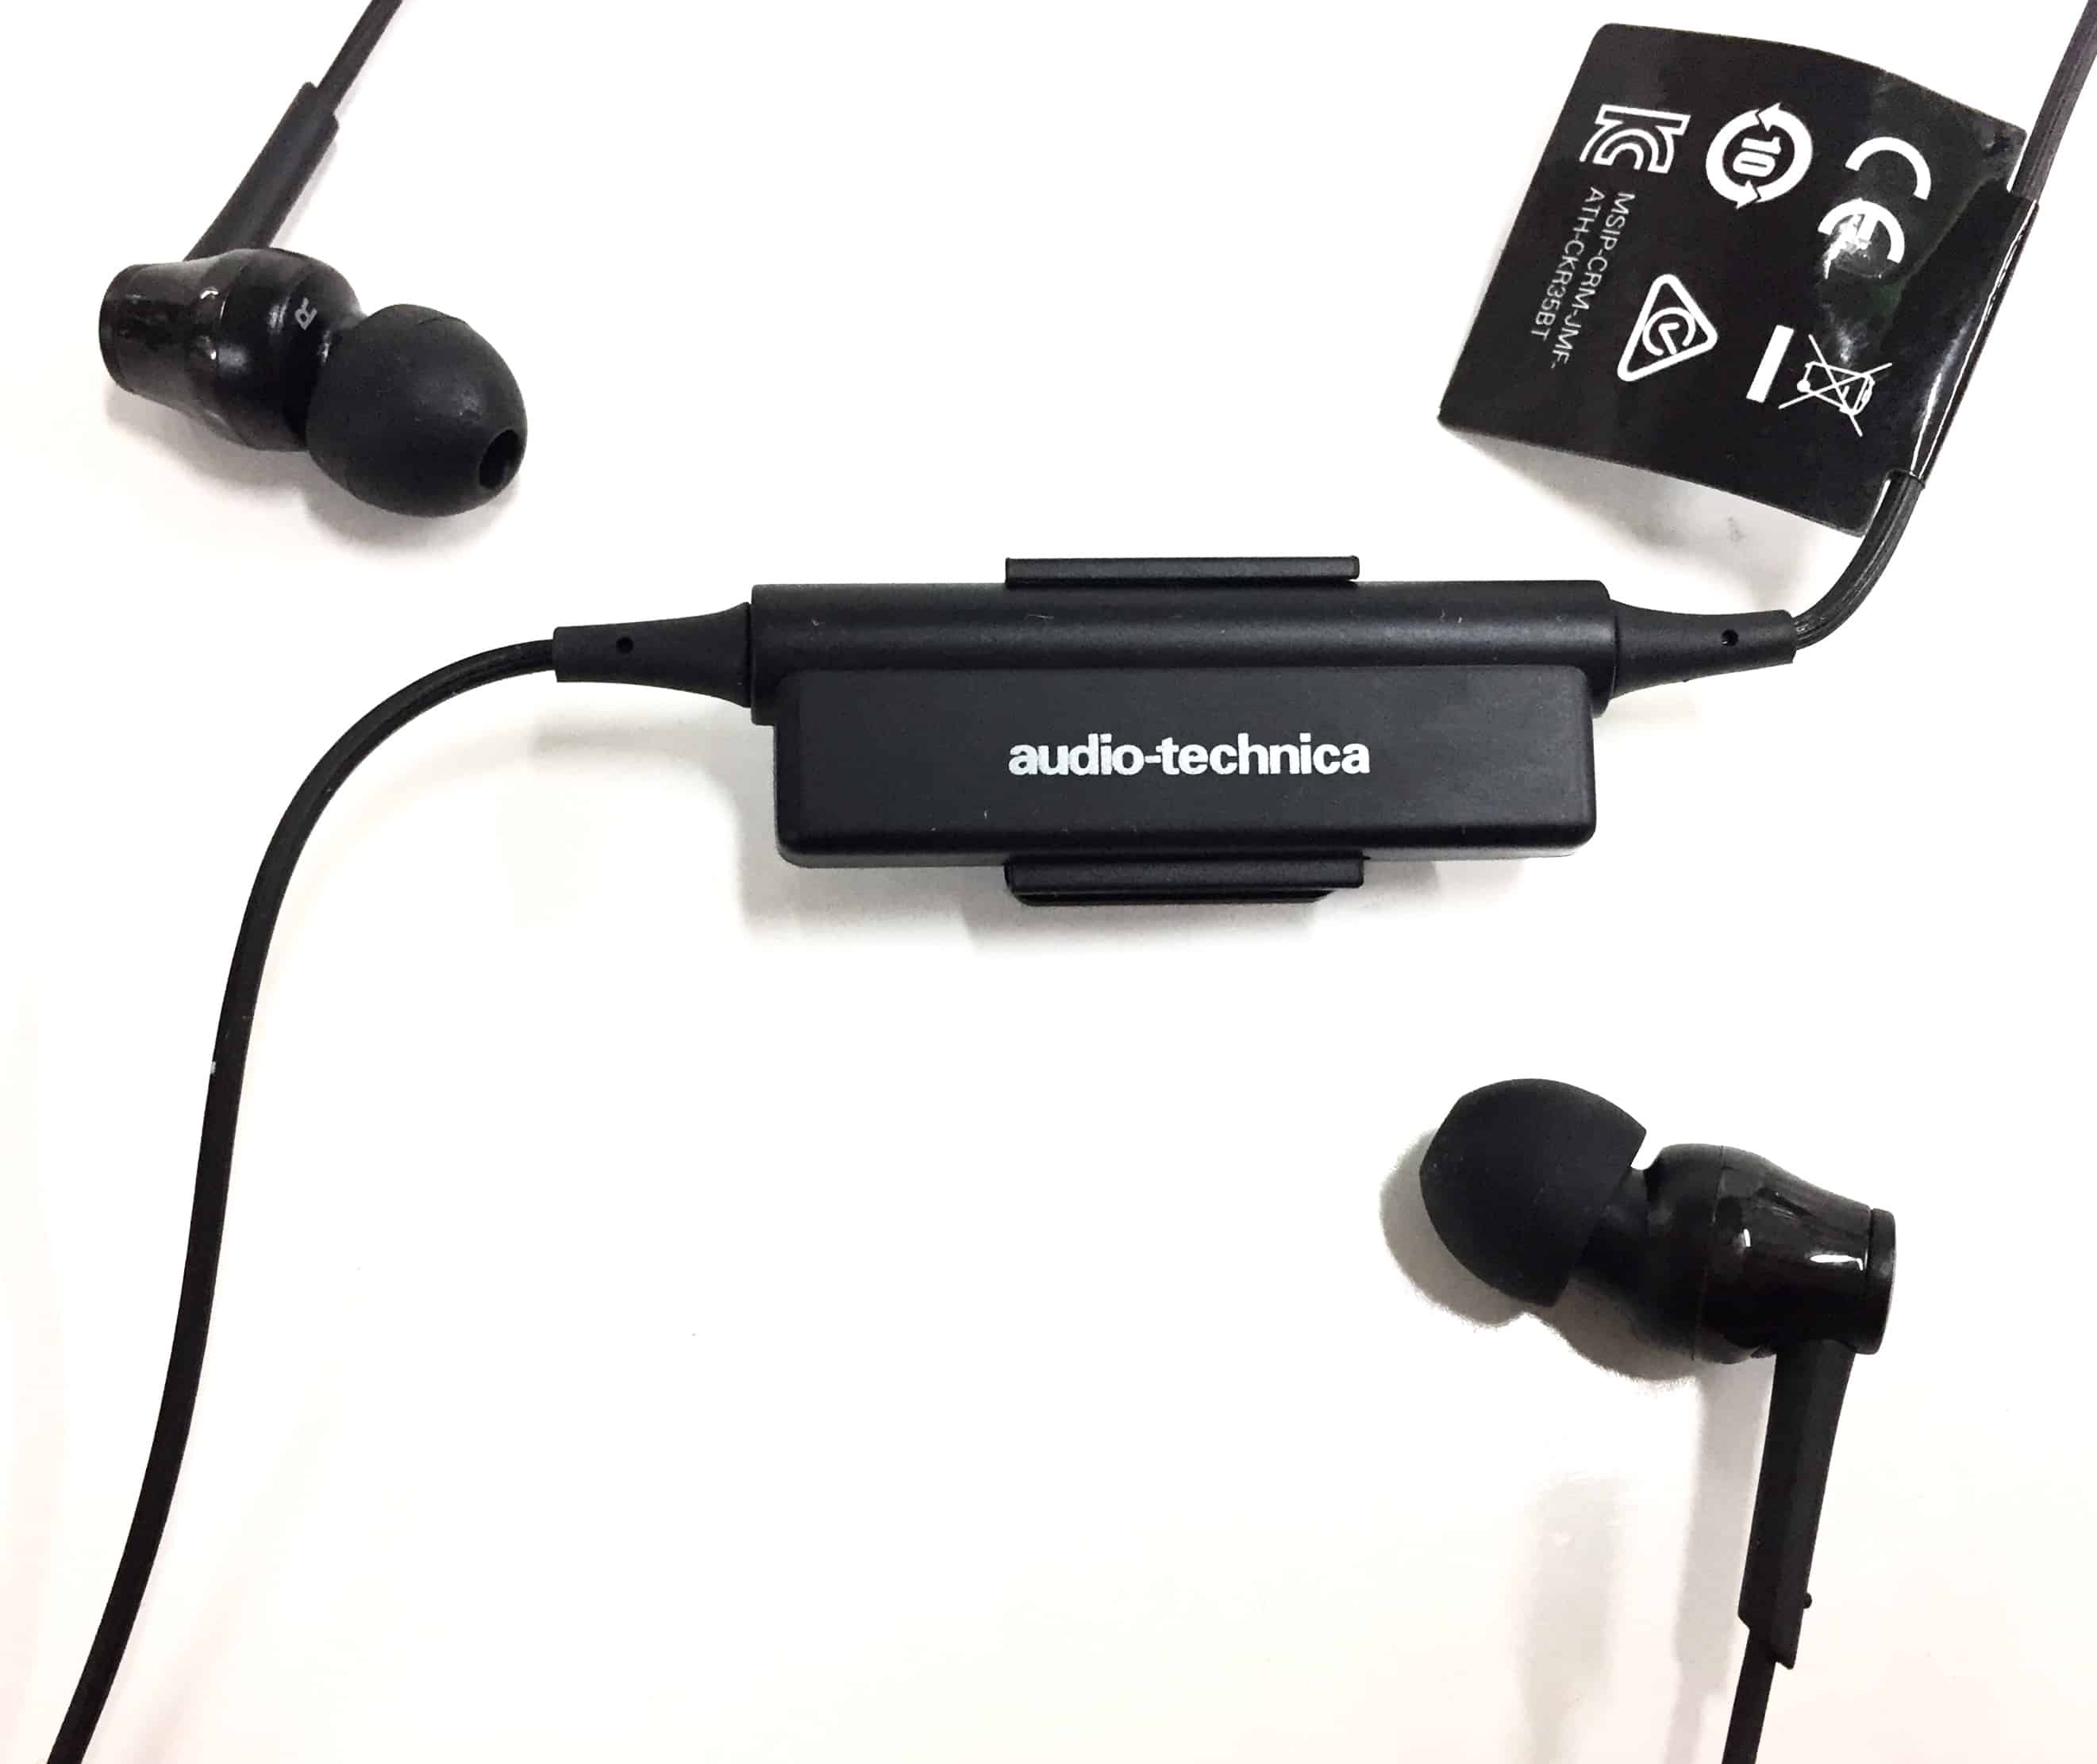 Audio-Technica ATH-TWX7 review: Good earbuds with frustrating flaws